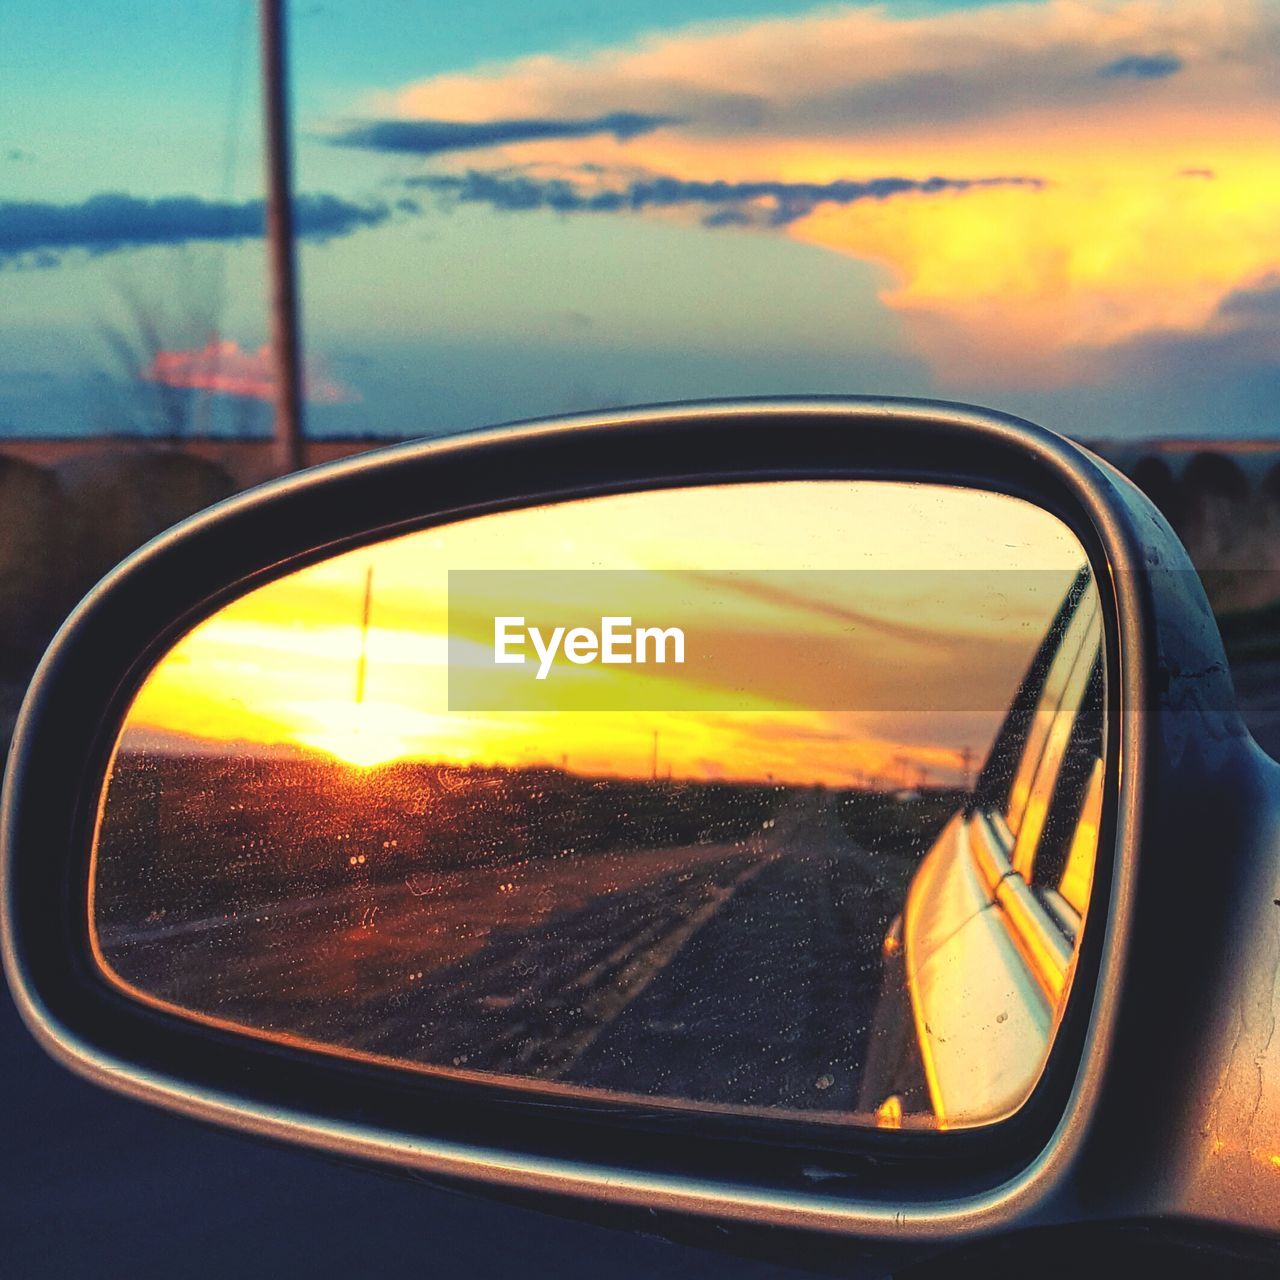 CLOSE-UP OF SIDE-VIEW MIRROR AGAINST SUNSET